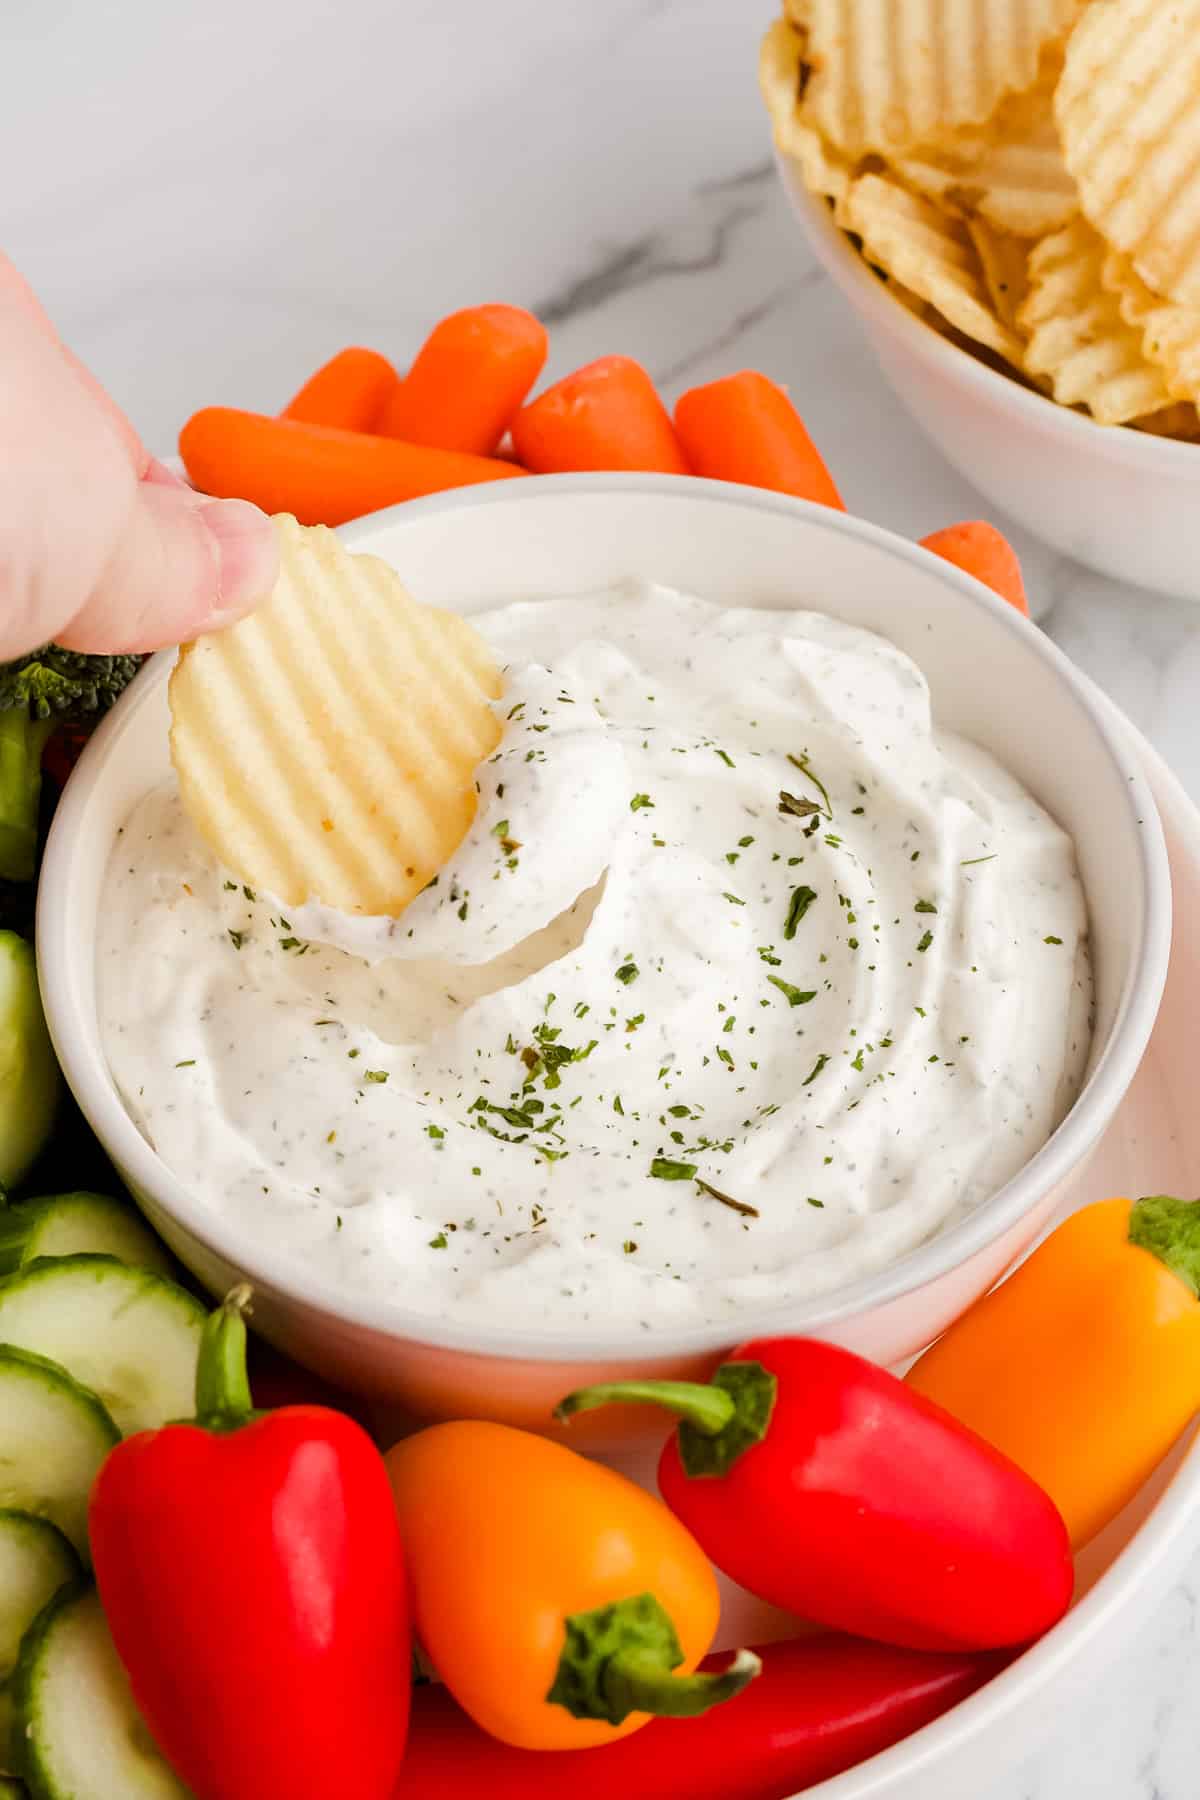 Hand dipping a potato chip into dip bowl surrounded by fresh veggies and bowl of potato chips in the background.